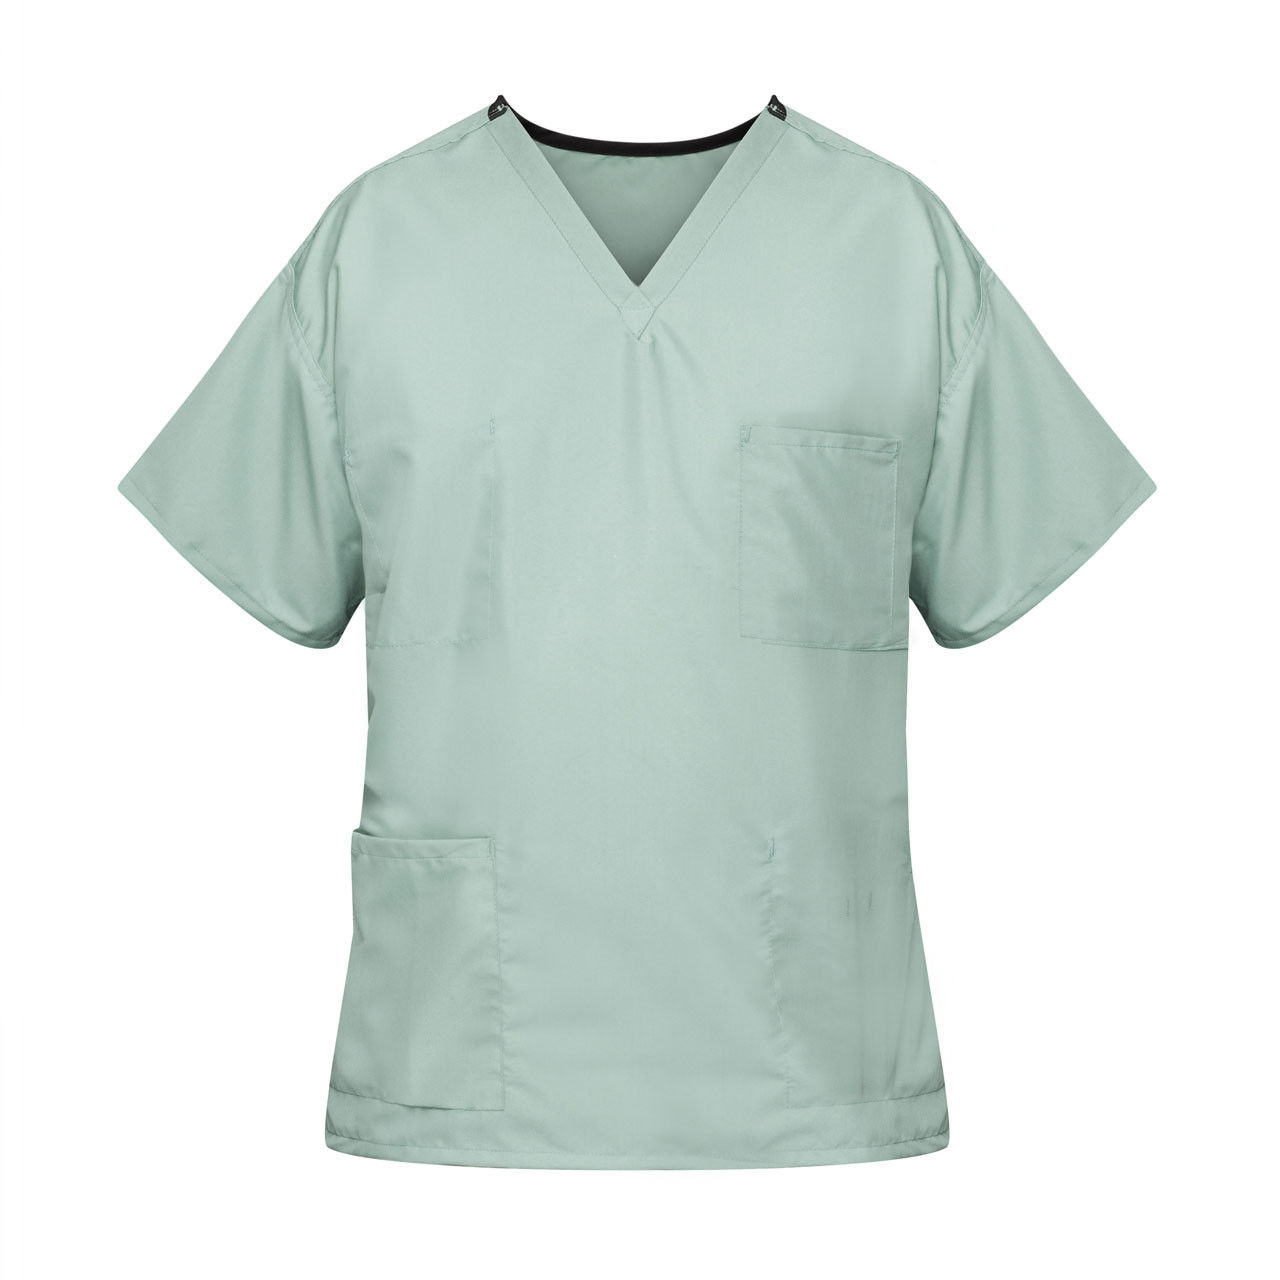 What makes the neck binding special in the Misty Green Scrubs?